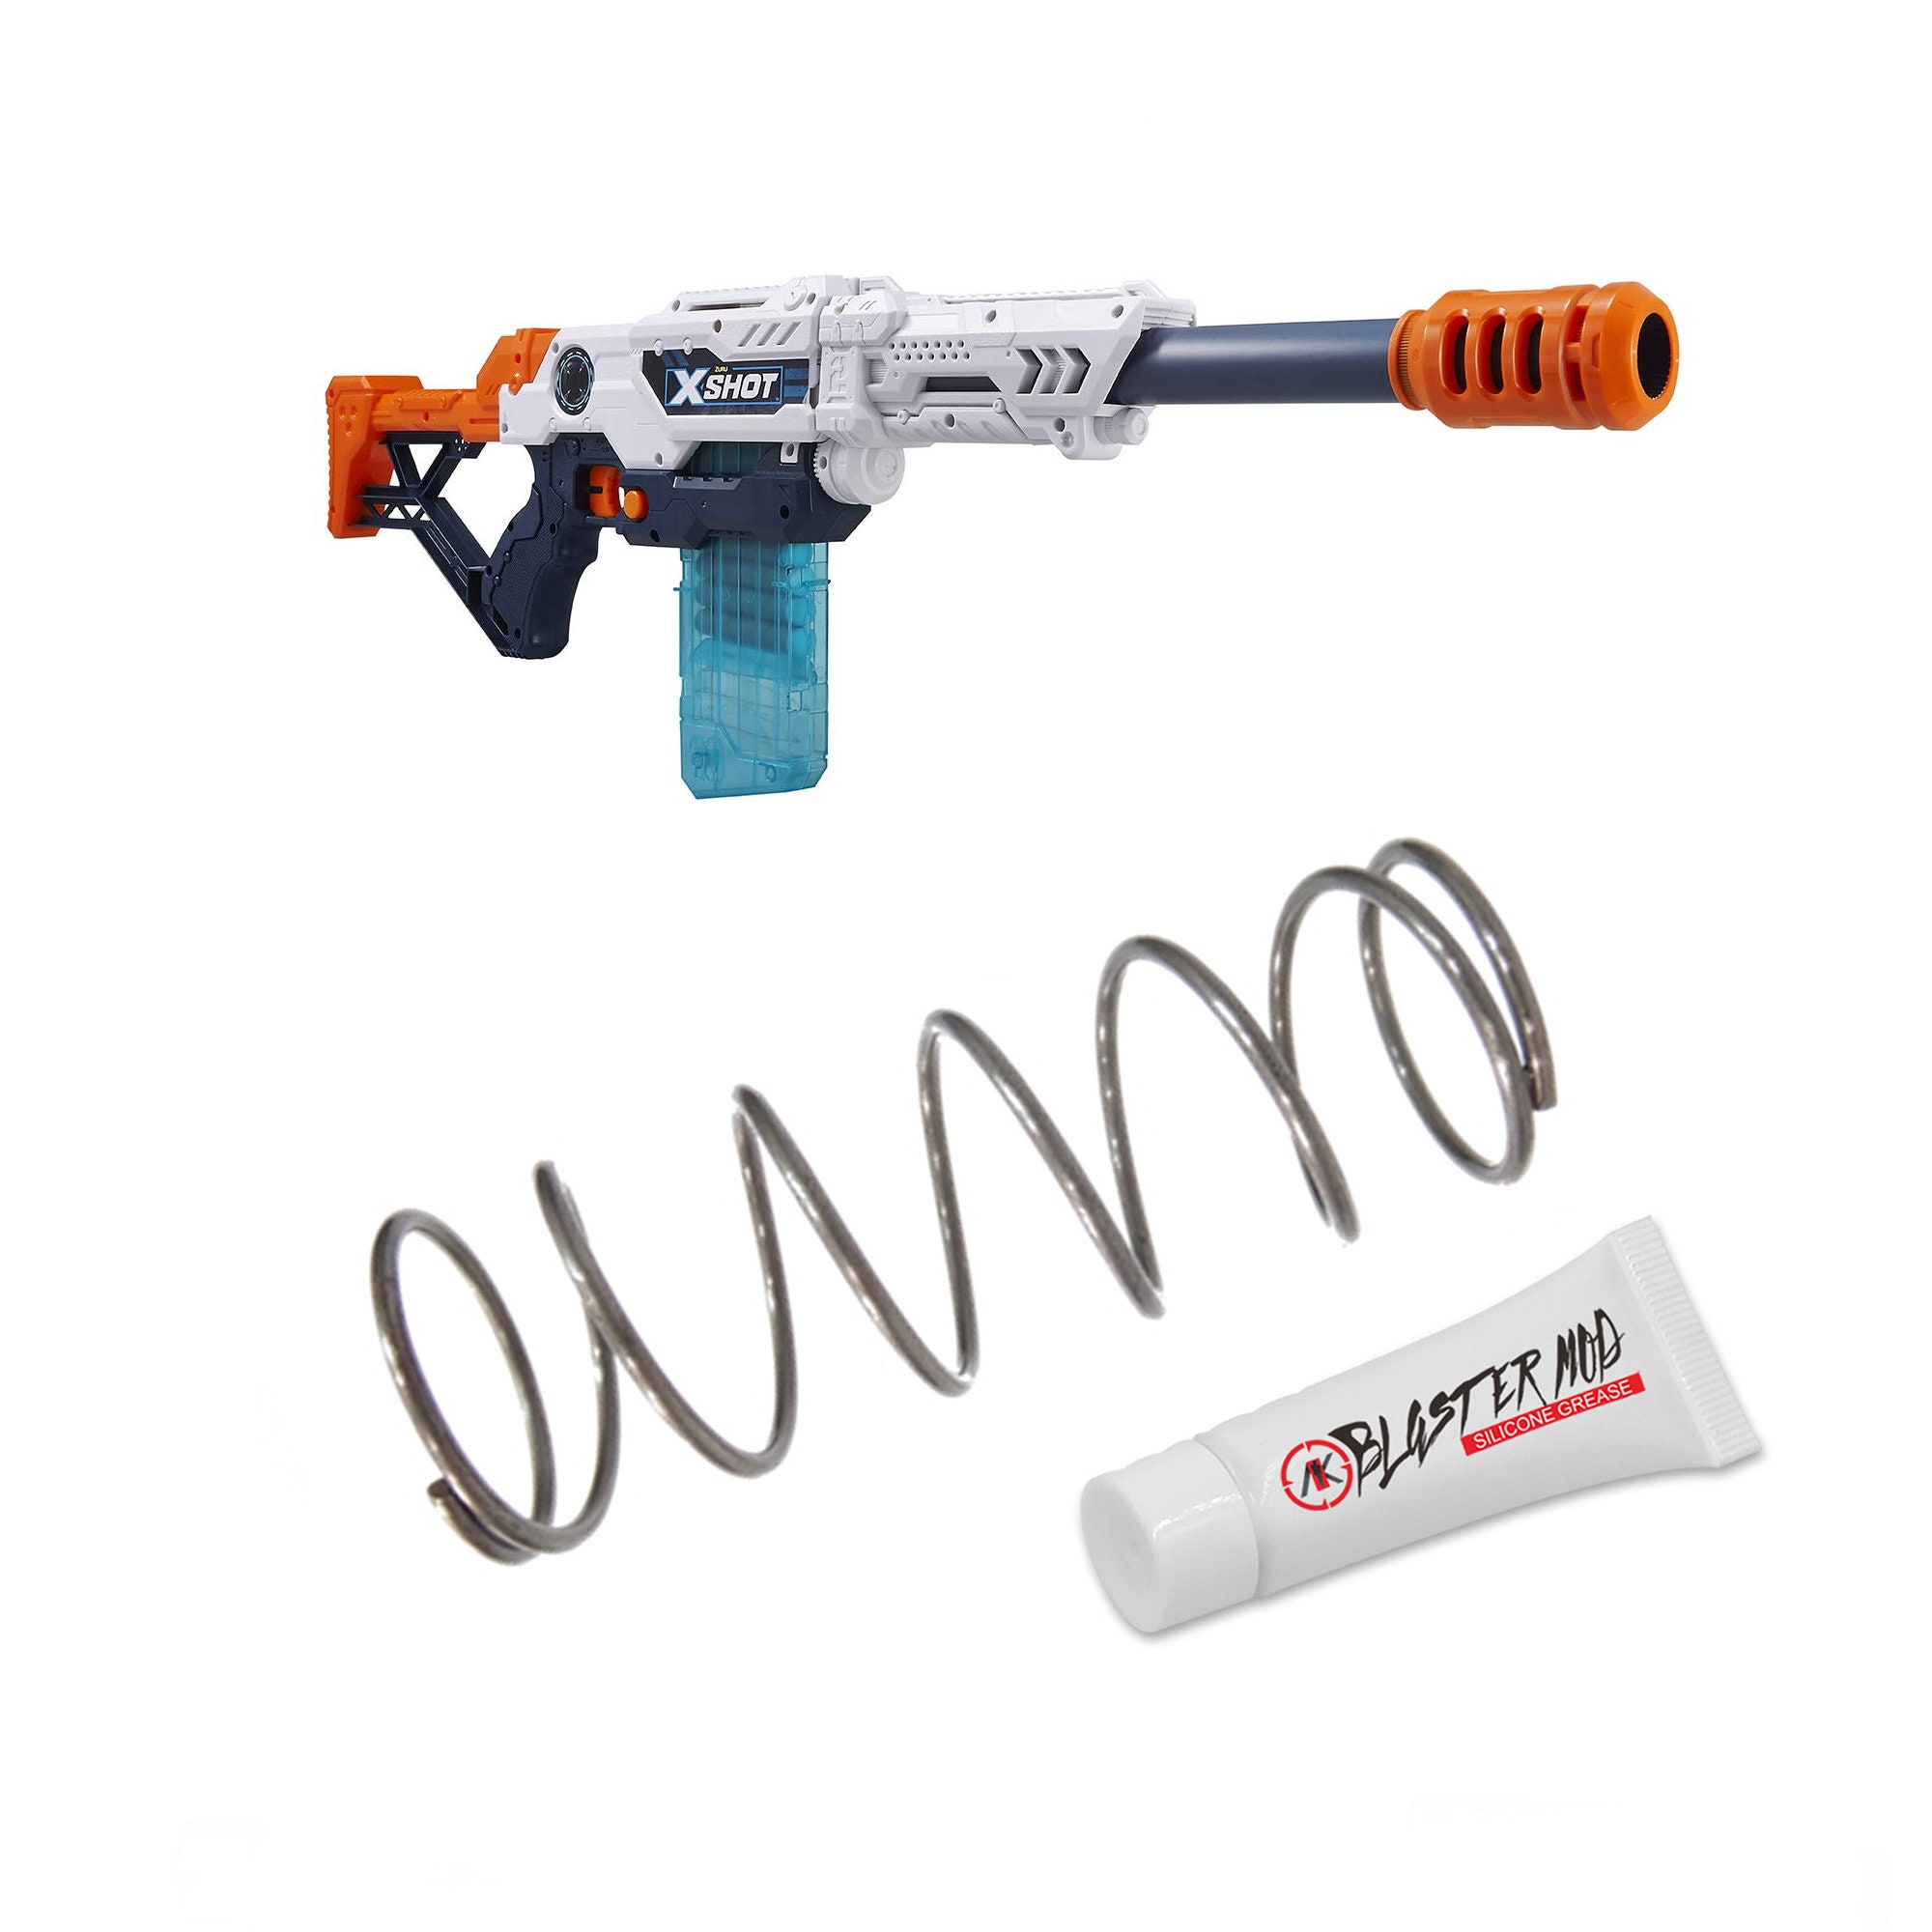 X-shot Excel Max Attack 5KG Modification Upgrade Spring Coil Blasters Dart  Toy 